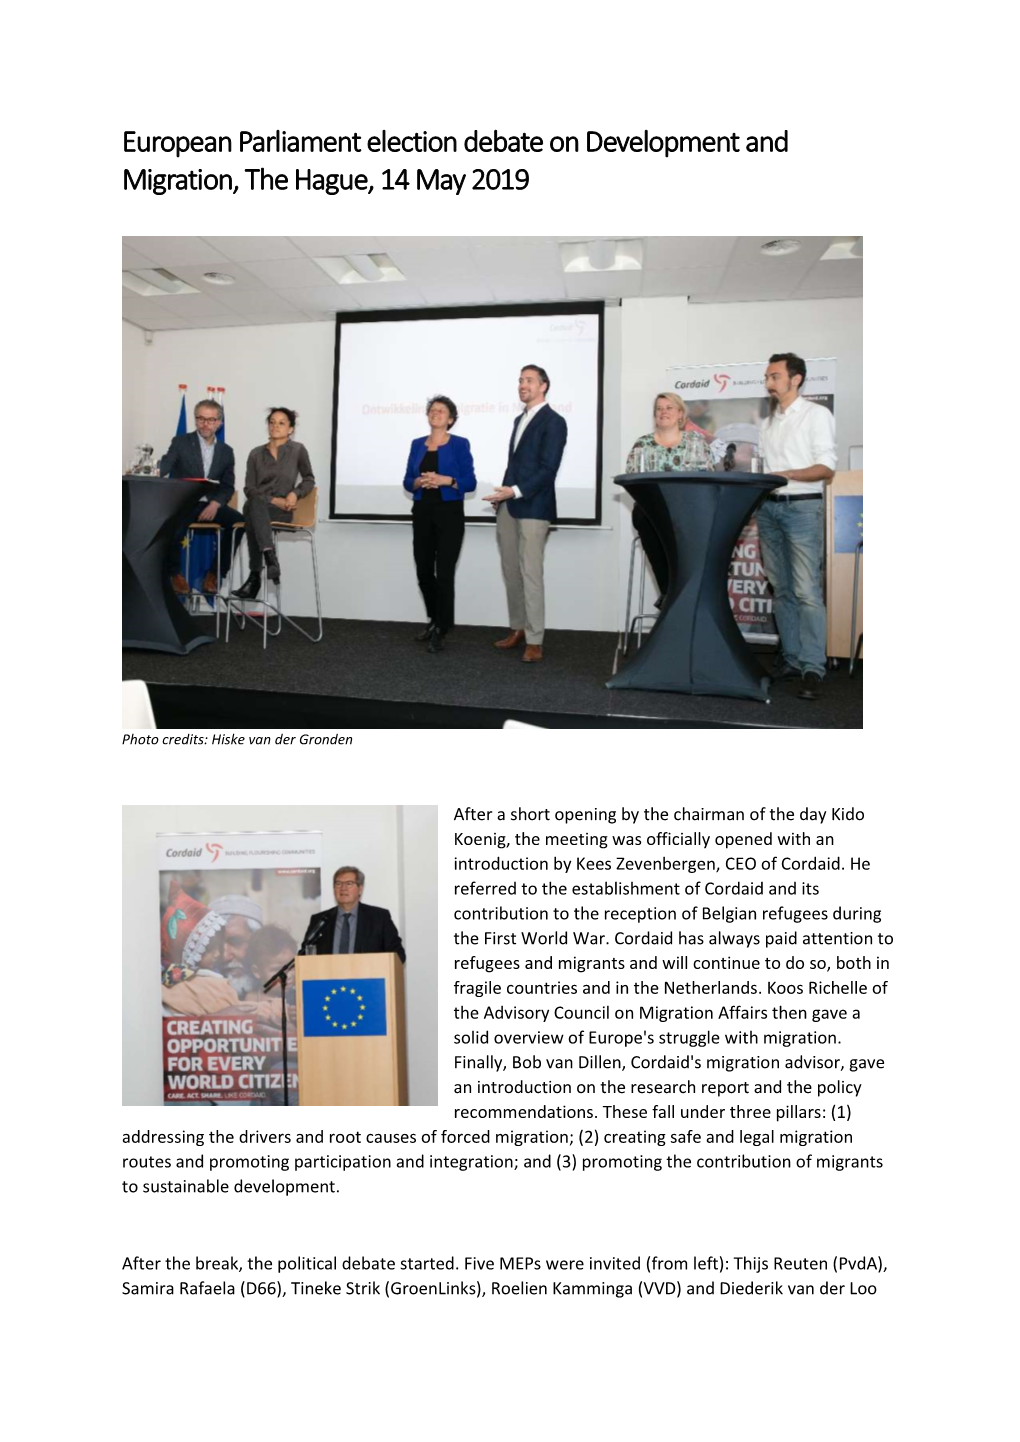 European Parliament Election Debate on Development and Migration, the Hague, 14 May 2019